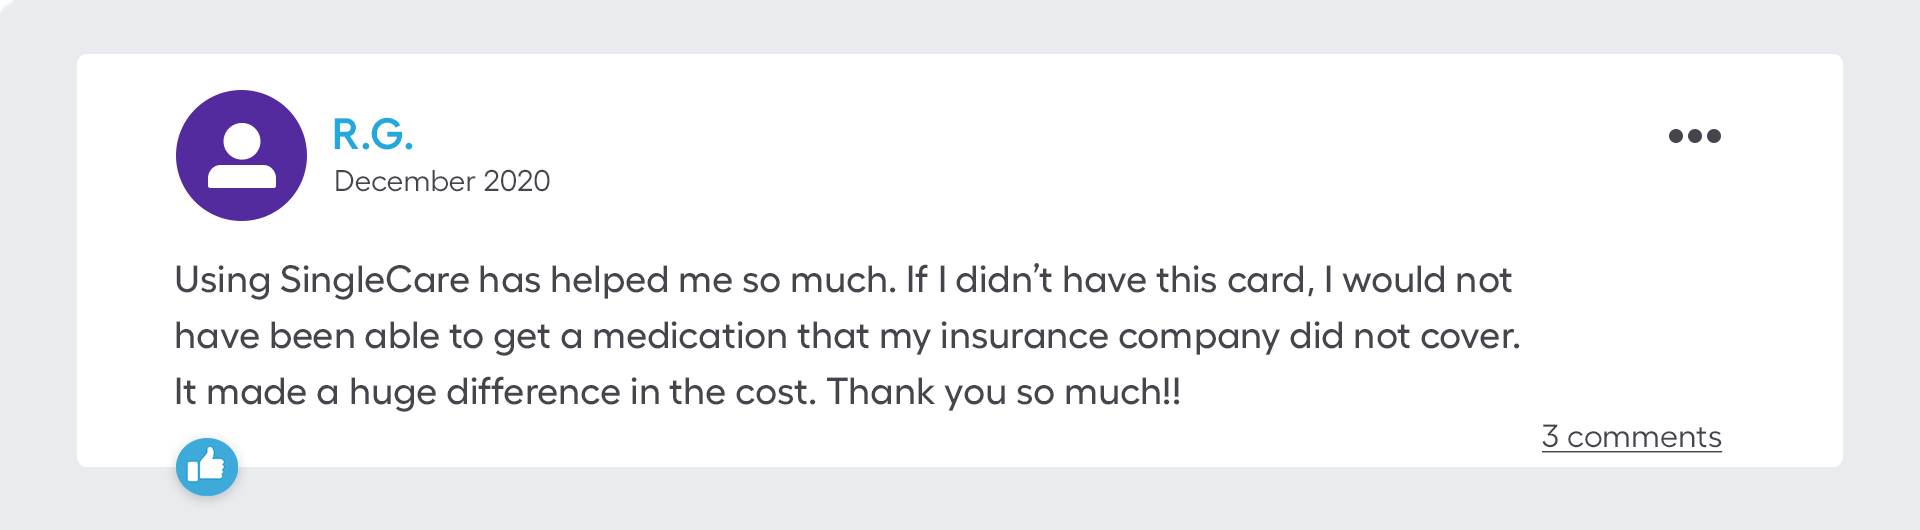 Using SingleCare has helped me so much. If I didn’t have this card, I would not have been able to get a medication that my insurance company did not cover. It made a huge difference in the cost. Thank you so much!!